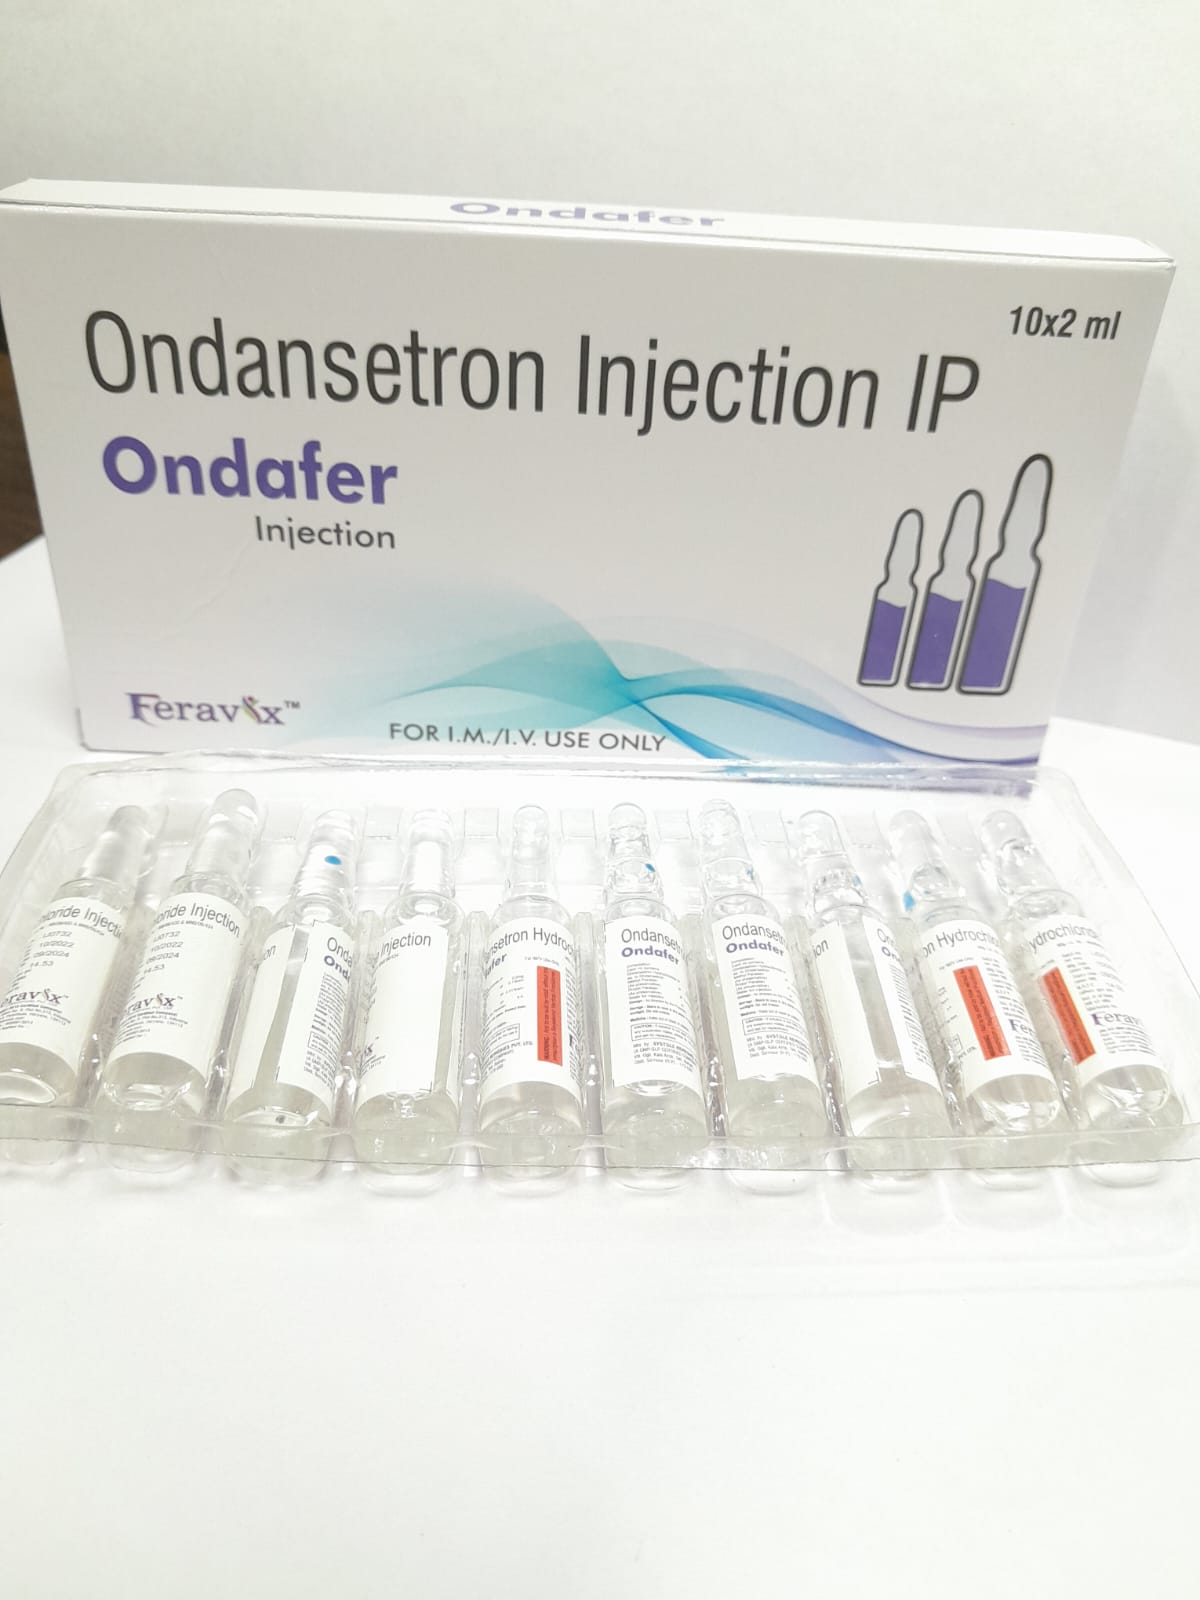 Product Name: ONDAFER Injection, Compositions of ONDAFER Injection are ONDANSETRON 2MG/ML - Feravix Lifesciences